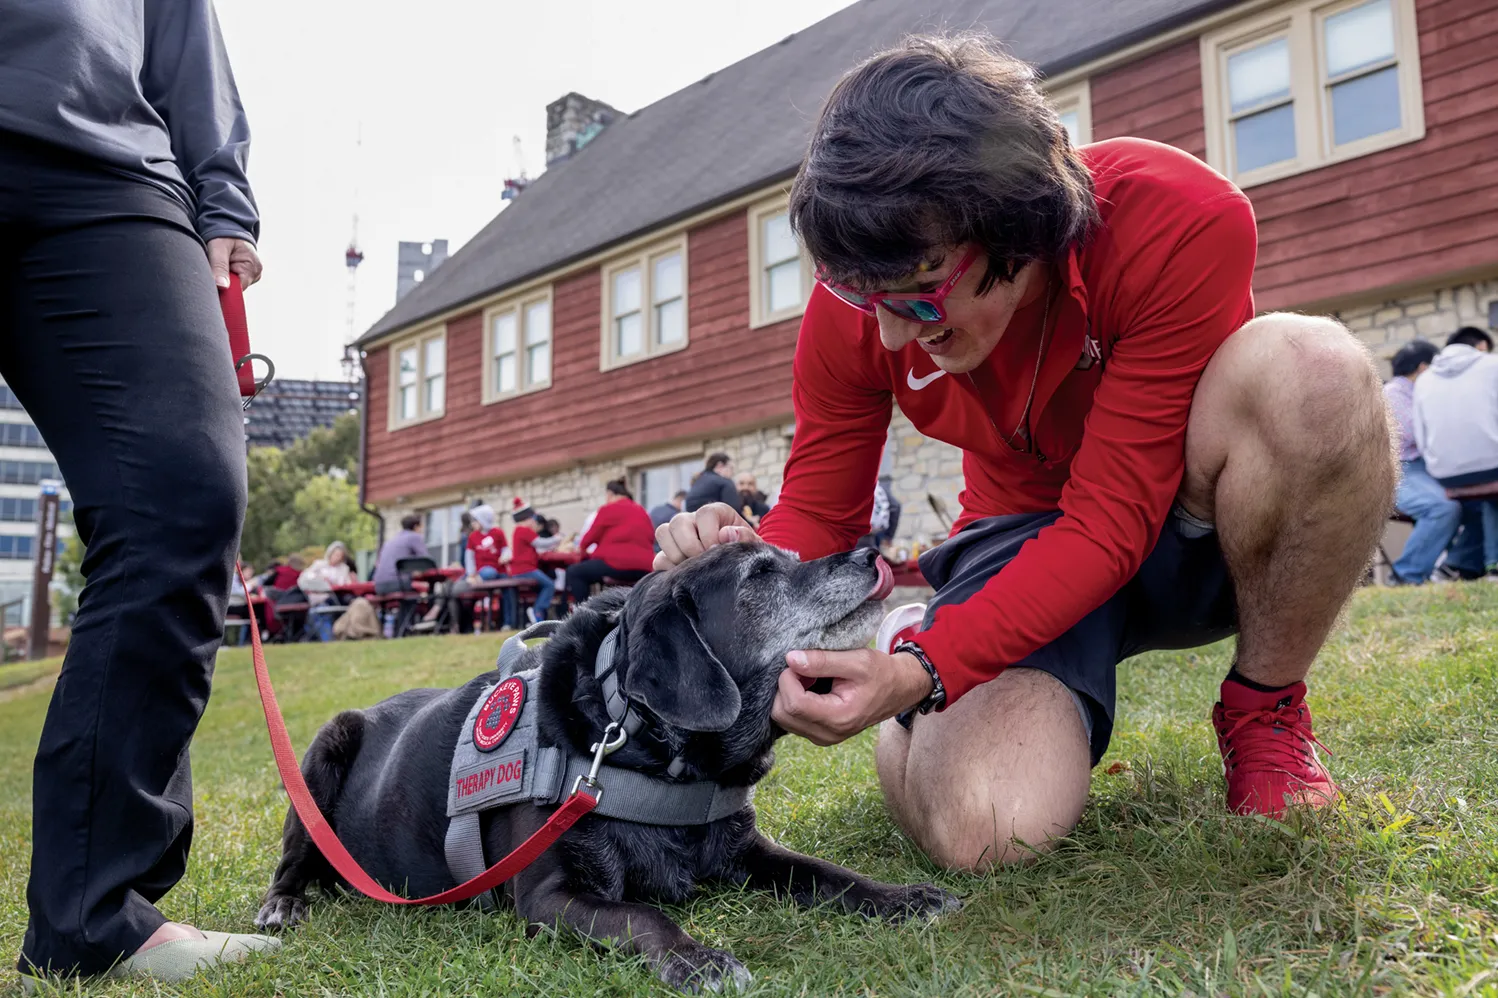 In the grass at an event, a young man wearing red sunglasses and an Ohio State shirt smiles as he kneels to pet a black dog. The dog seemingly gazes adoringly at him as it slightly licks its gray-speckled muzzle and wears a vest that says “therapy dog.”